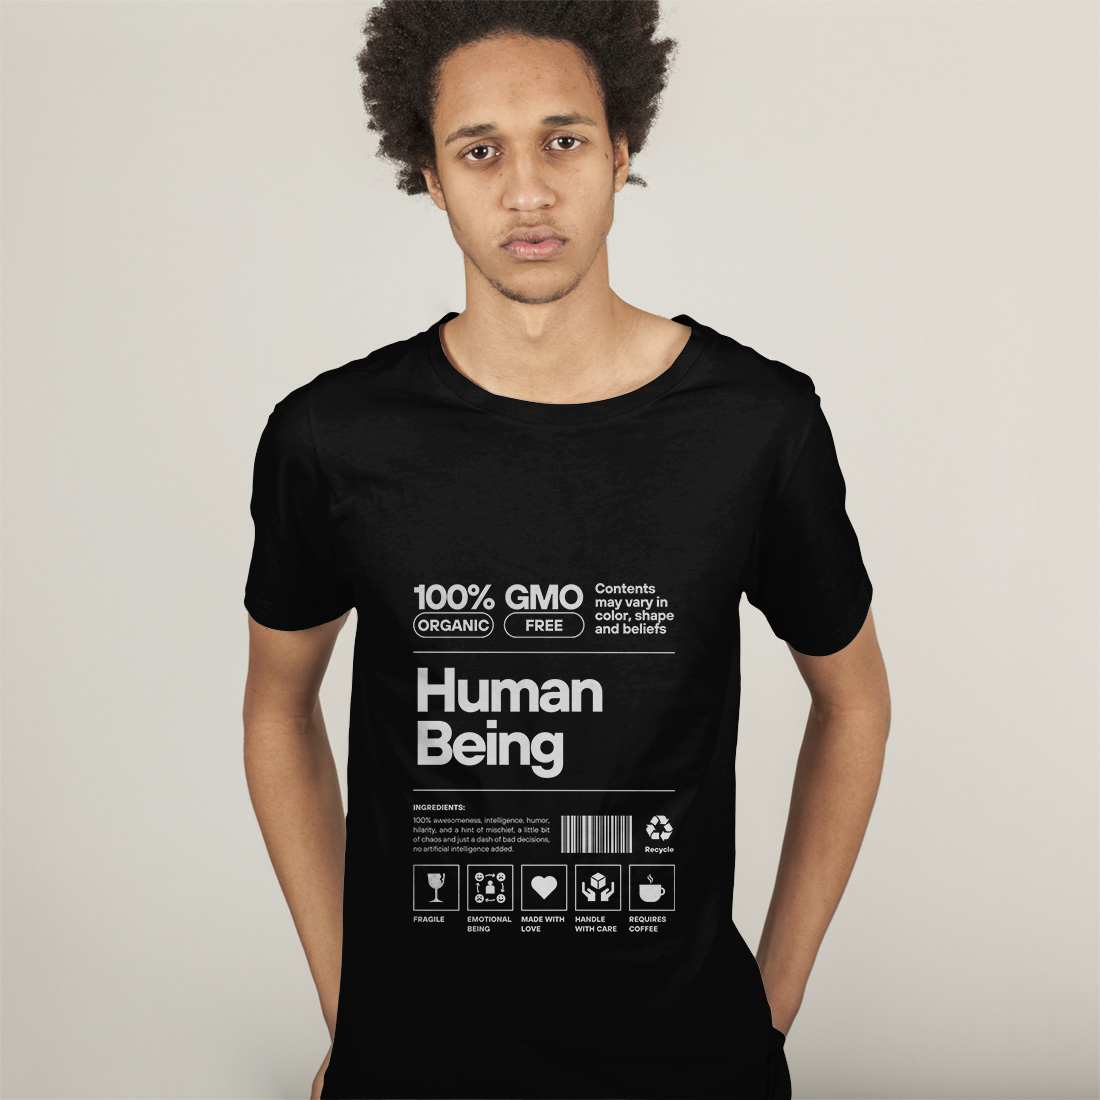 Human Being Design SVG, PNG preview image.